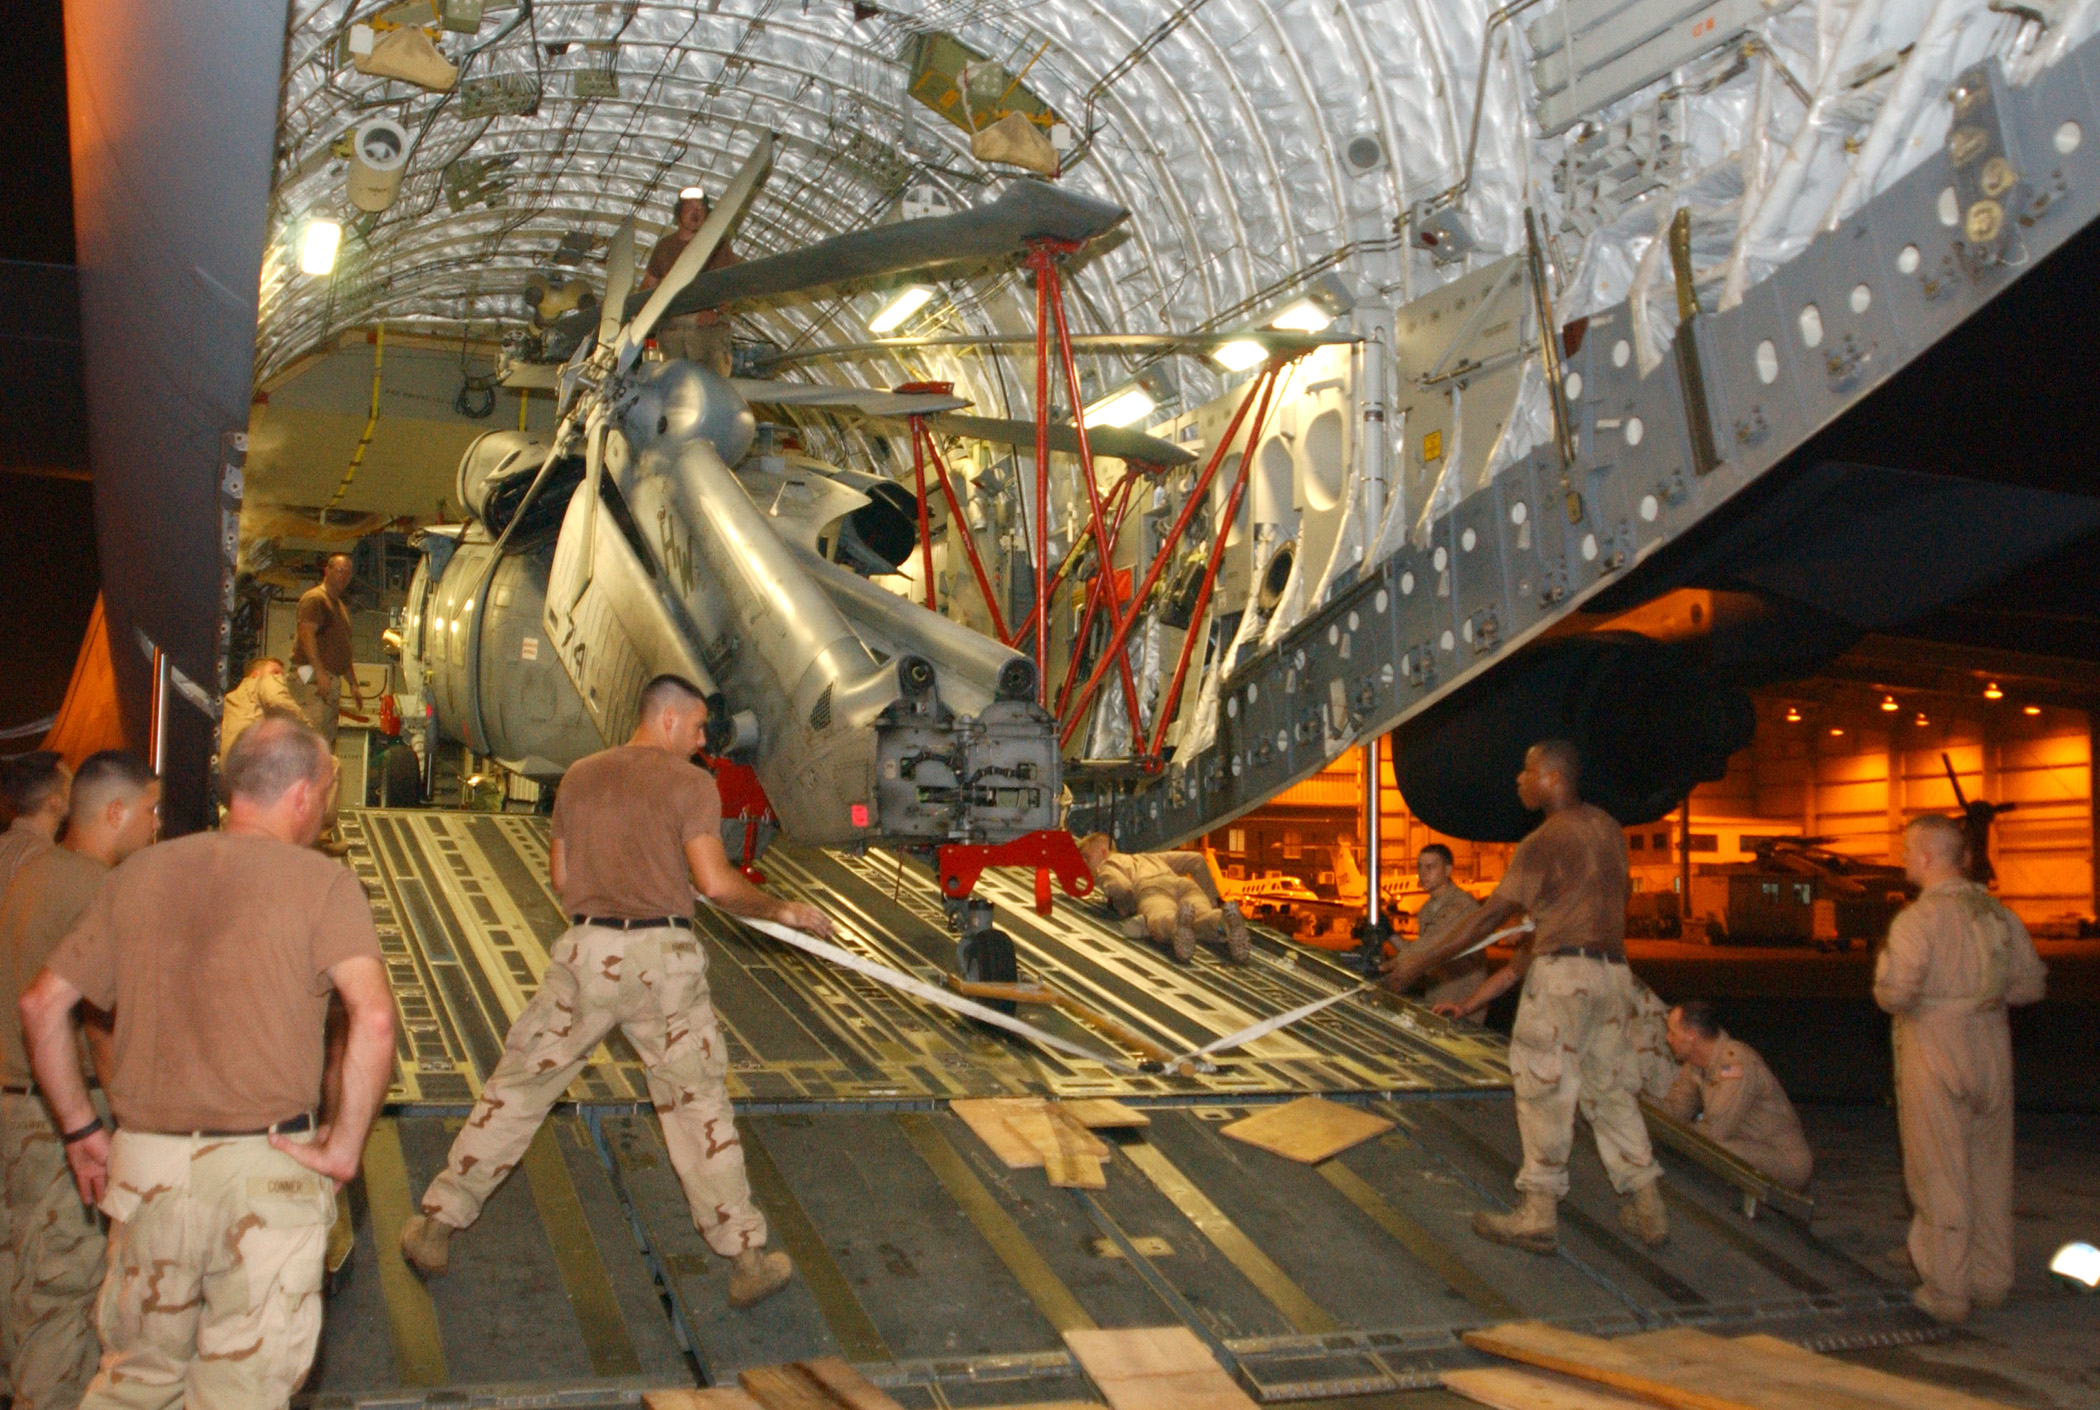 US Navy 051015-N-5863B-002 U.S. Navy helicopter loaded onto transport aircraft bound for Pakistan earthquake relief efforts